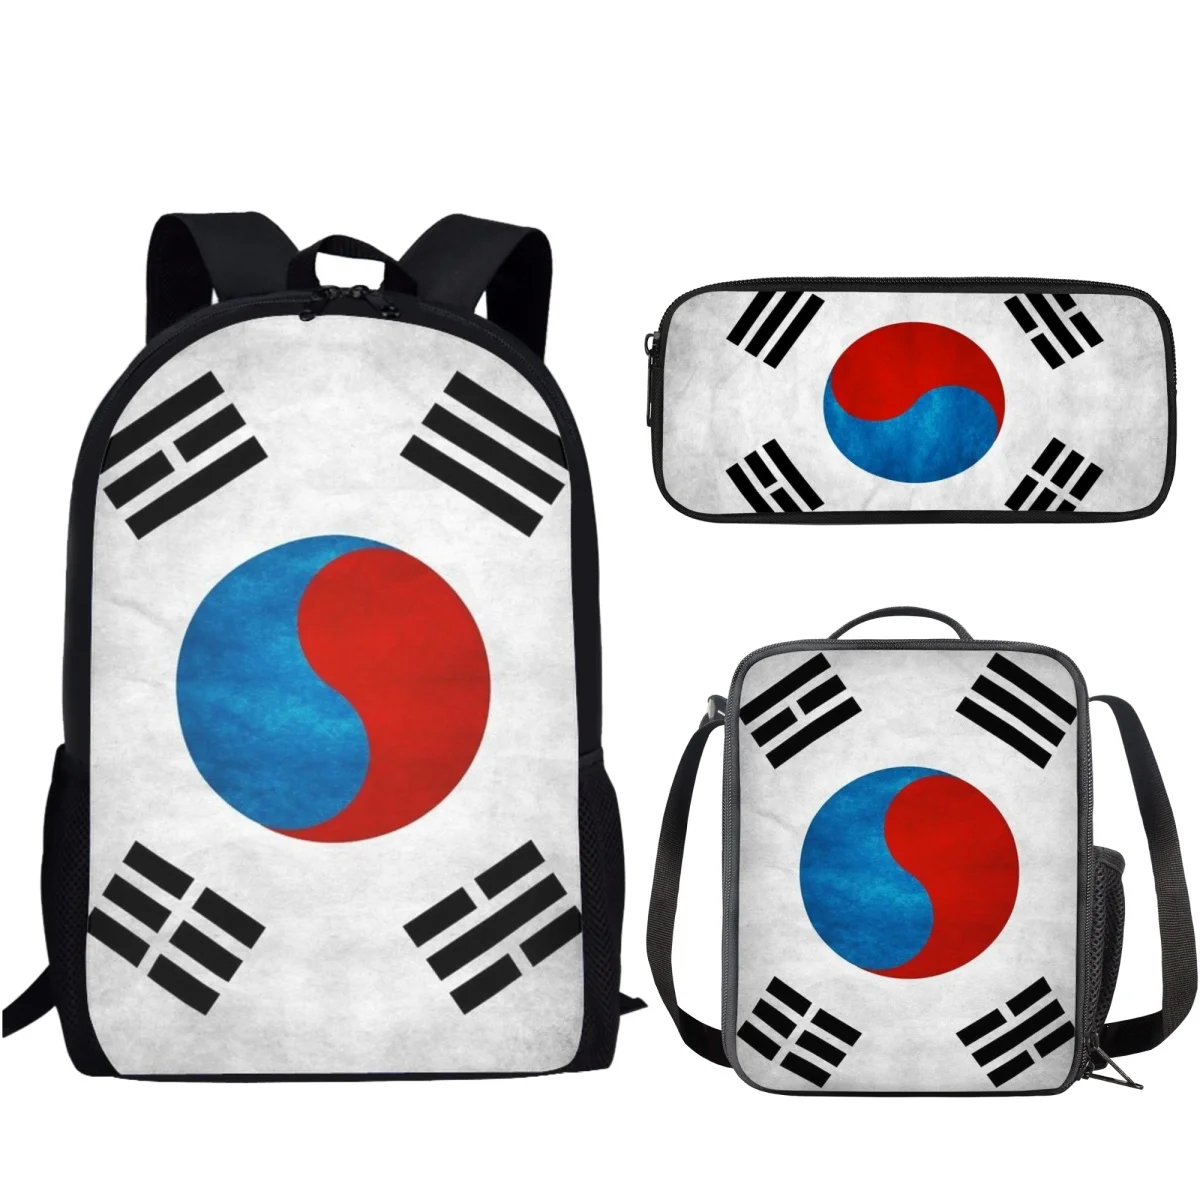 

South Korea Flag Print School Bags Set of 3 Large Capacity Children Book Bags for Teenagers Backpack with Lunch Box /Pencil Case